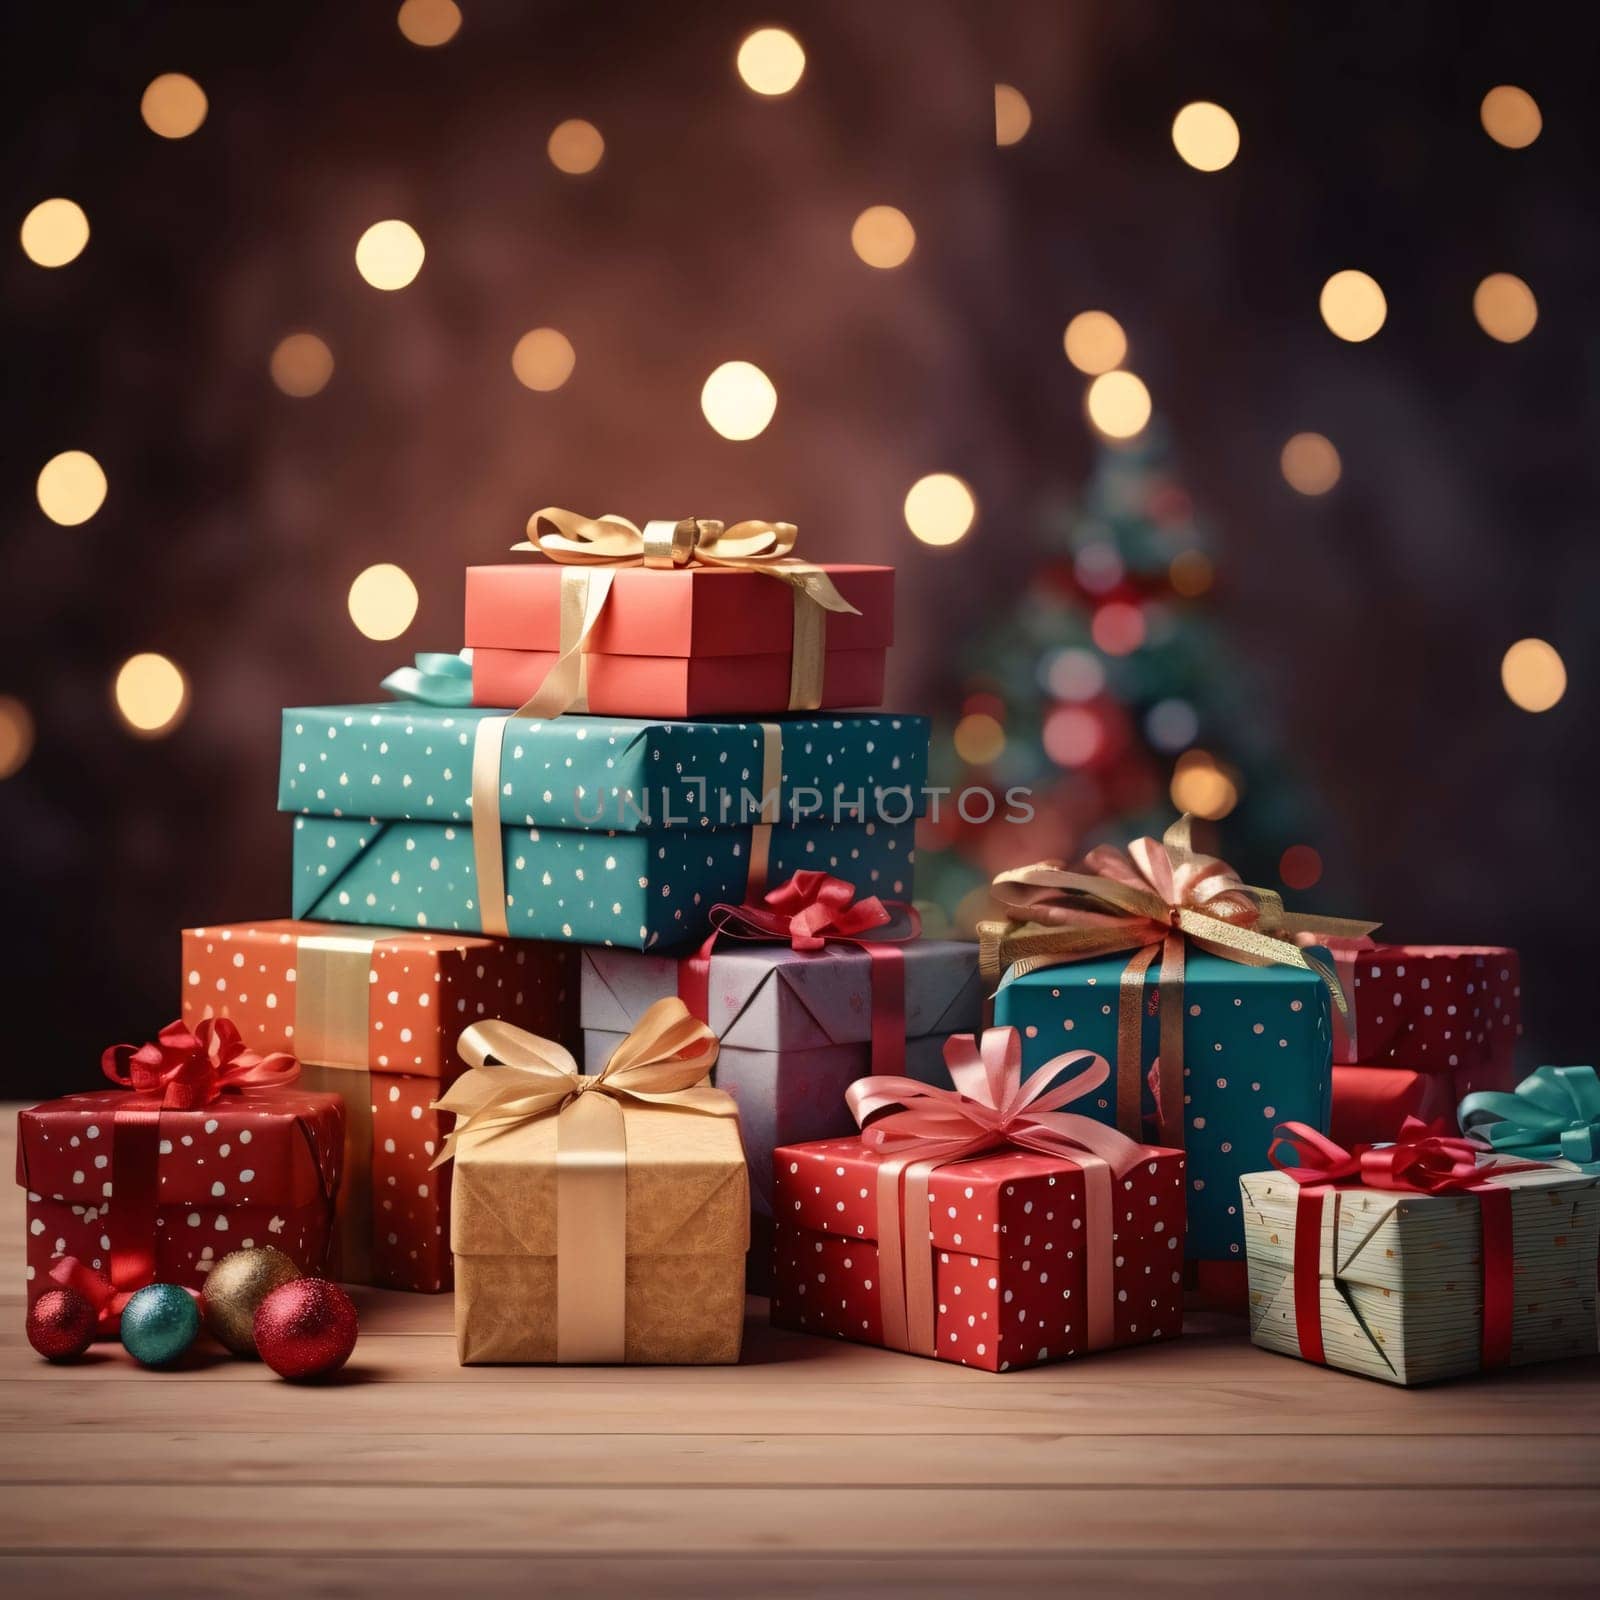 Colorful gifts arcade jump on wooden table in the background bokeh effect of lights. Gifts as a day symbol of present and love. A time of falling in love and love.